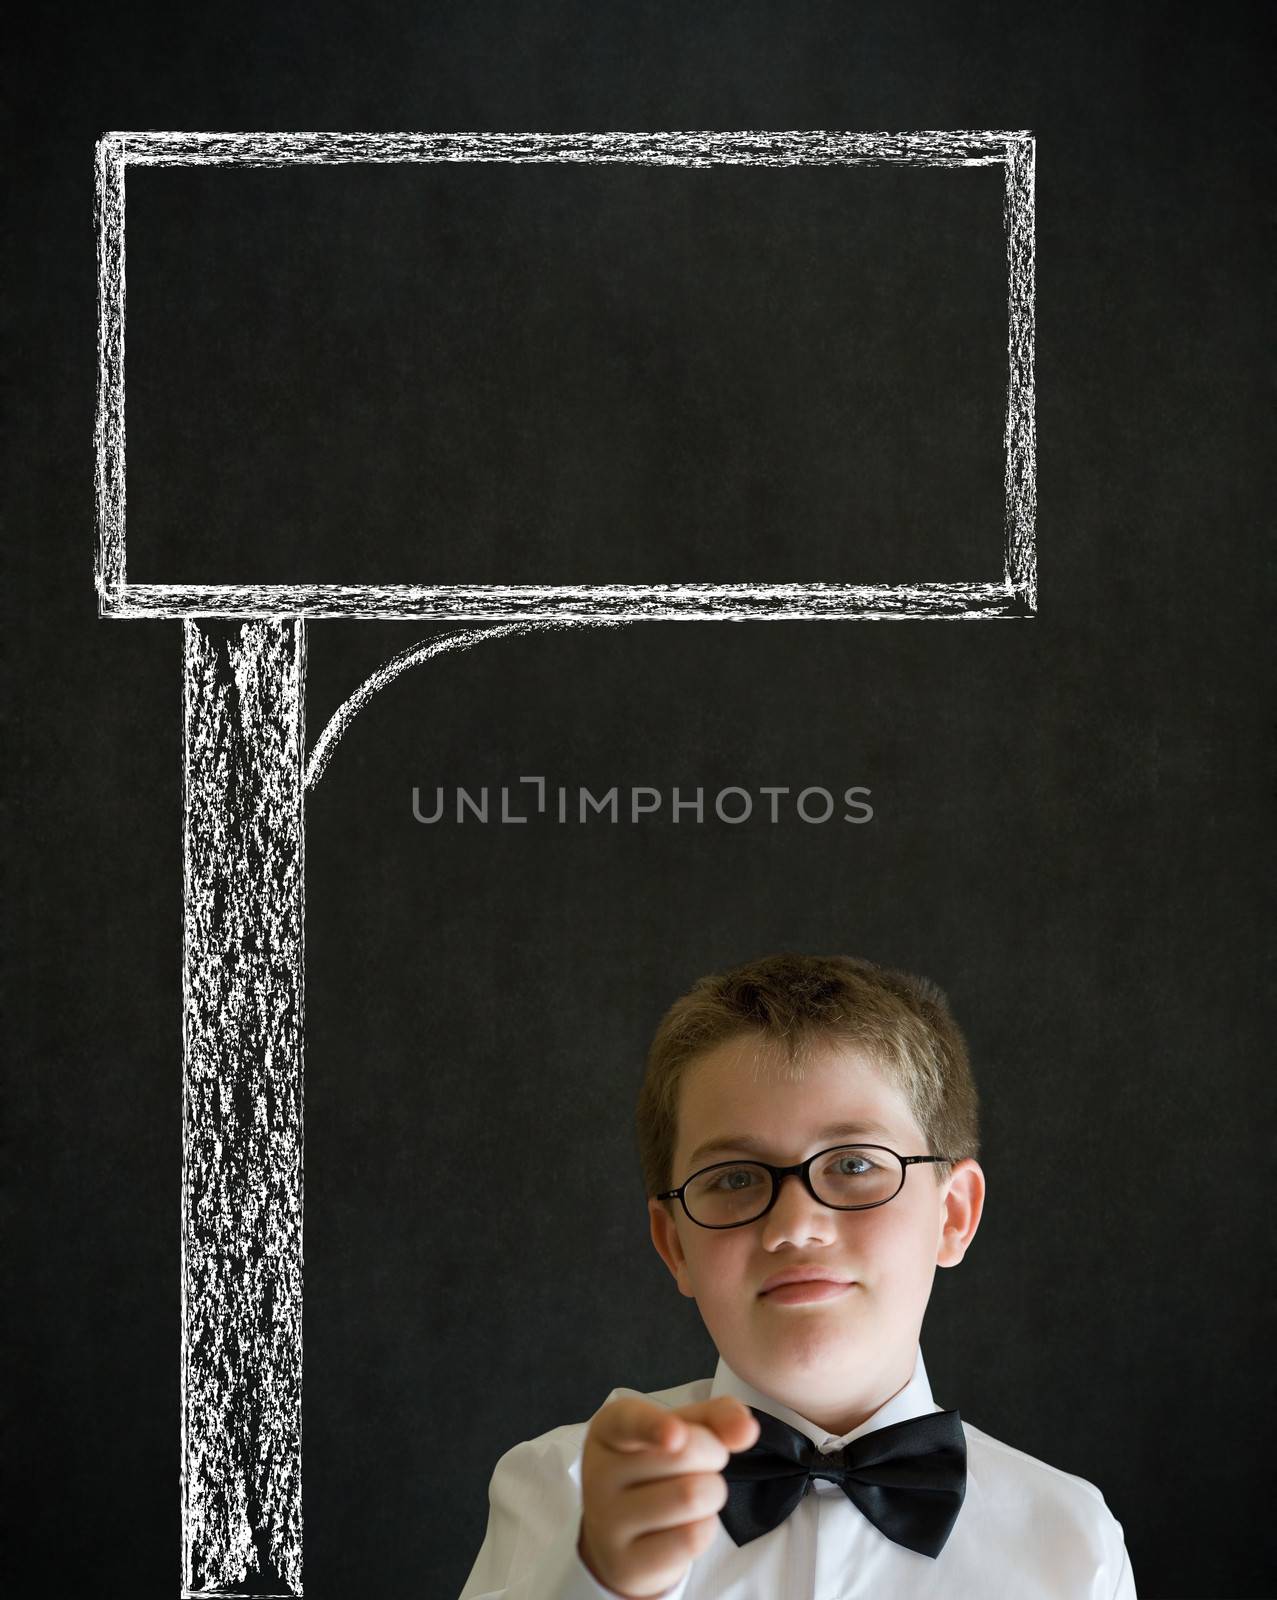 Education needs you thinking boy business man with chalk road advertising sign by alistaircotton